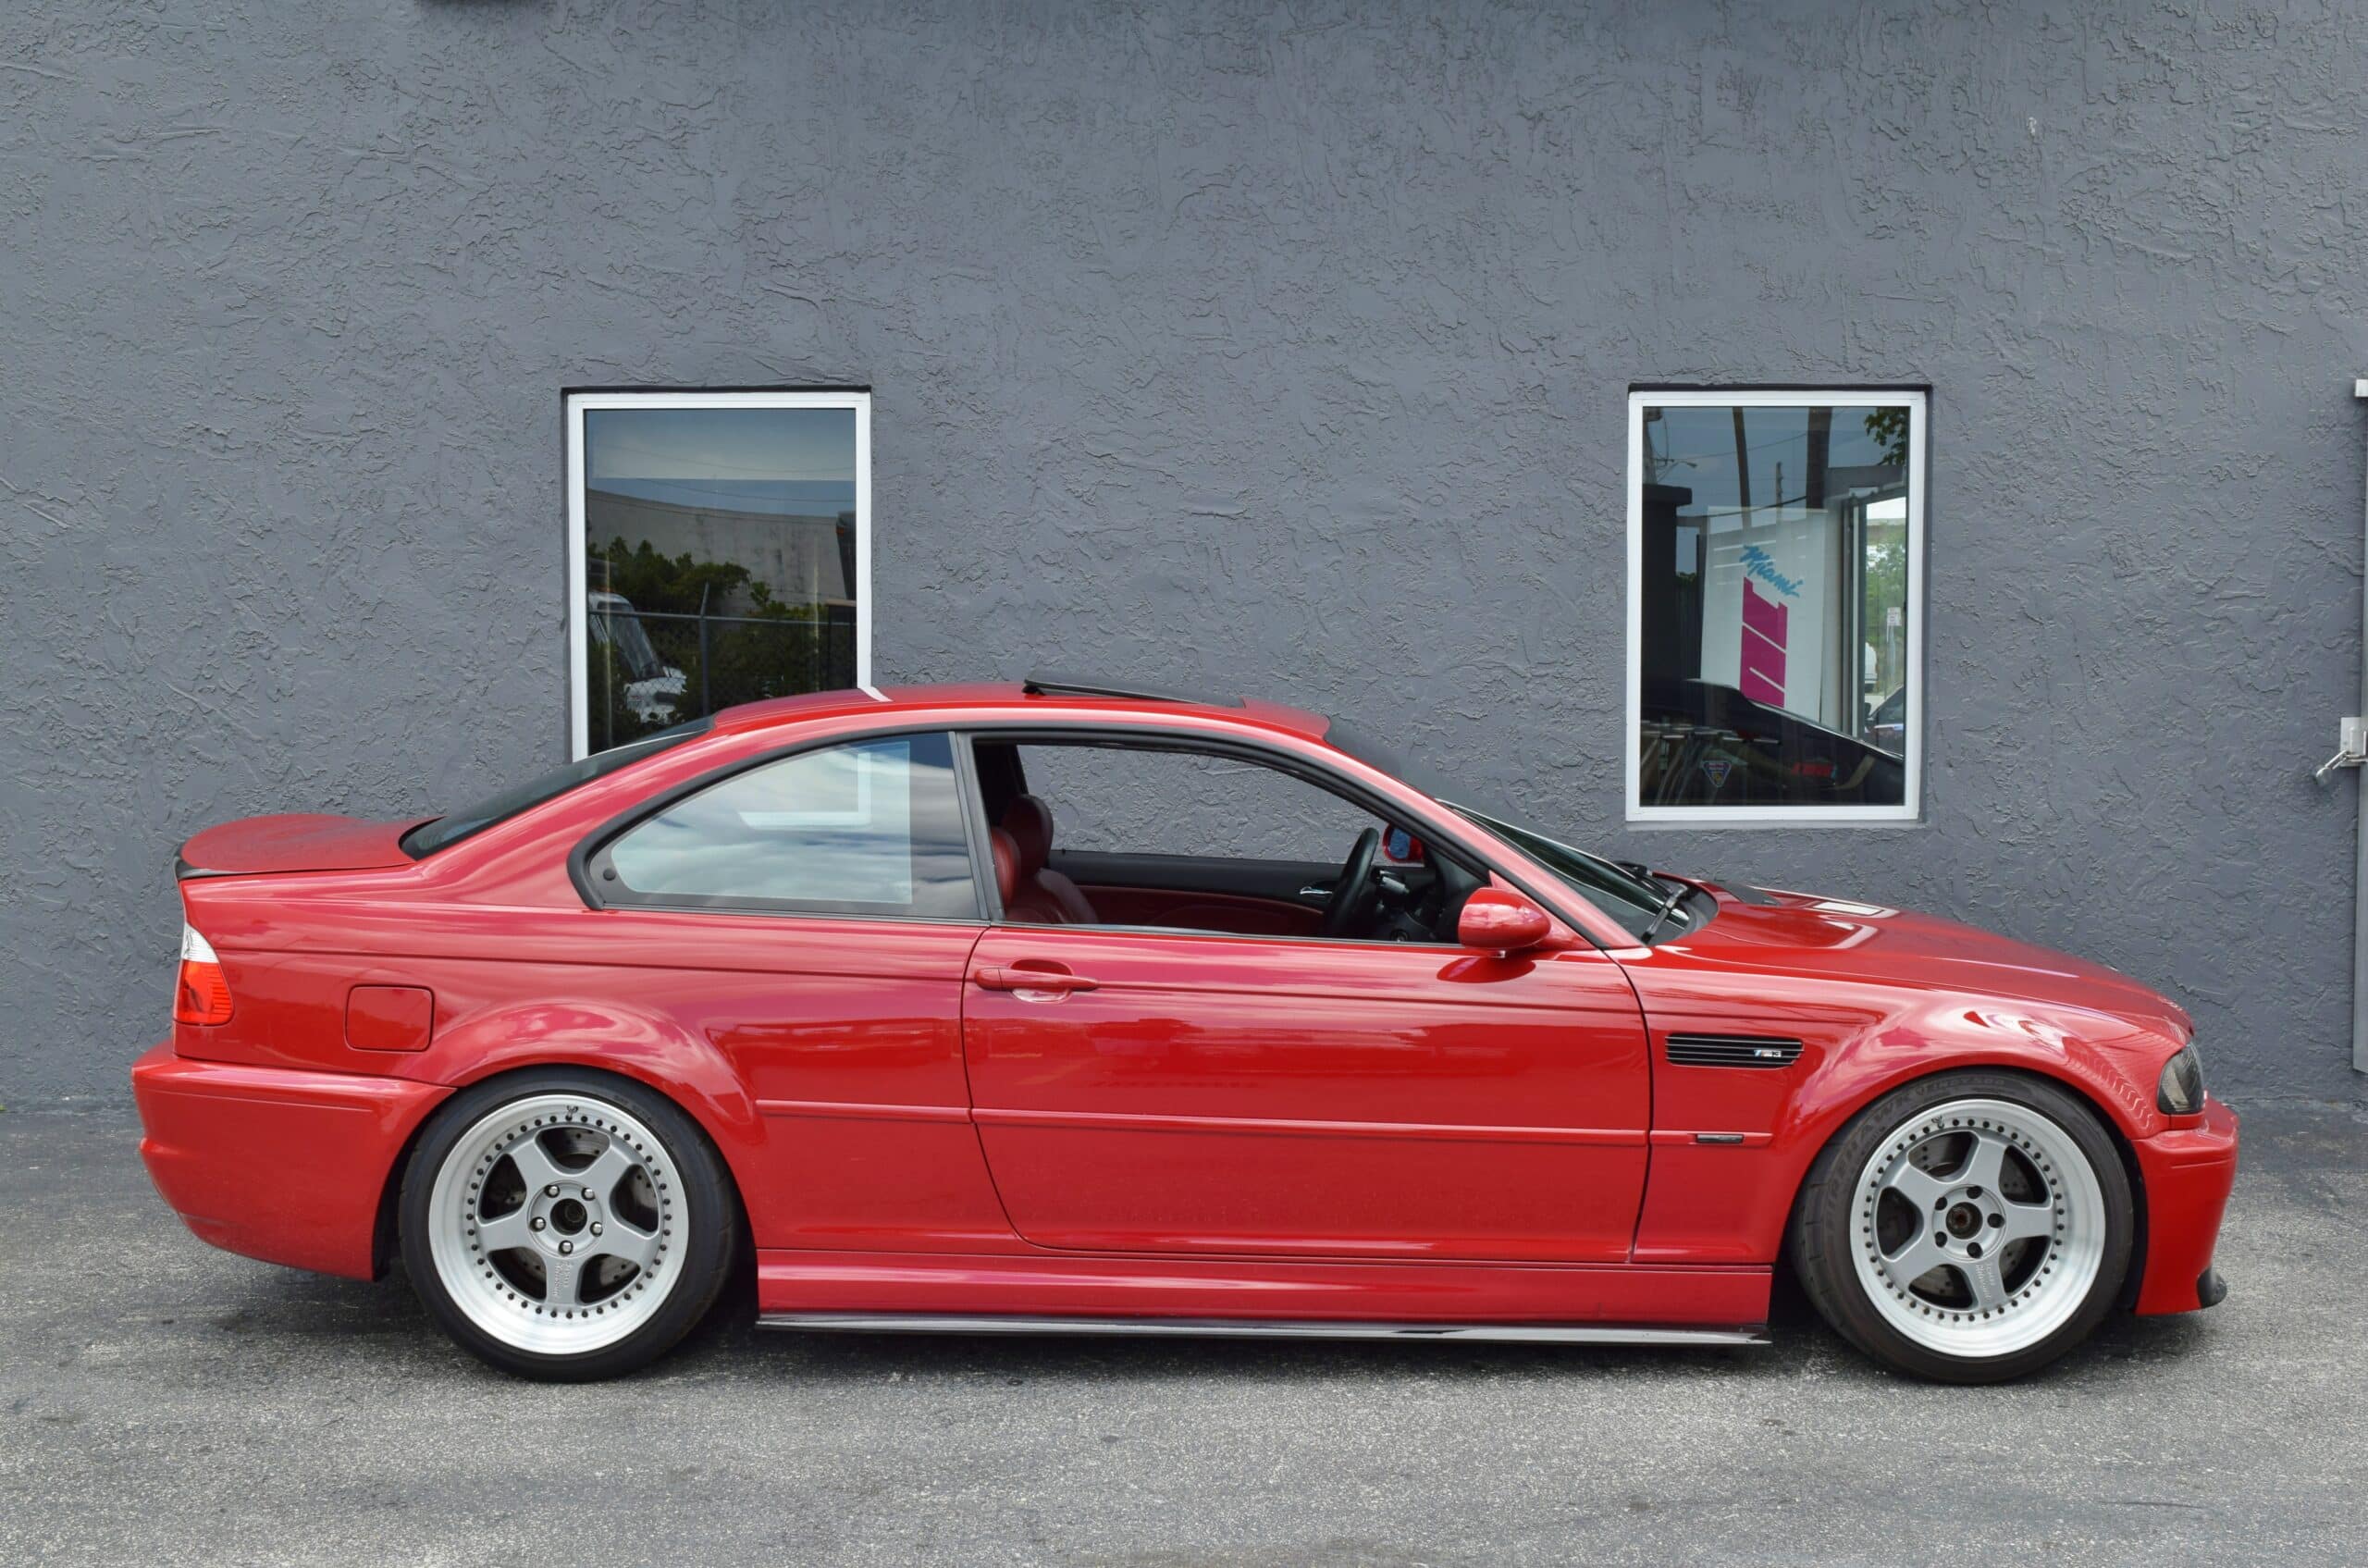 2002 BMW M3 E46 6 Speed Manual Imola Red/Red interior Supercharged-Airlift Suspension-Over $40,000 in Reciepts